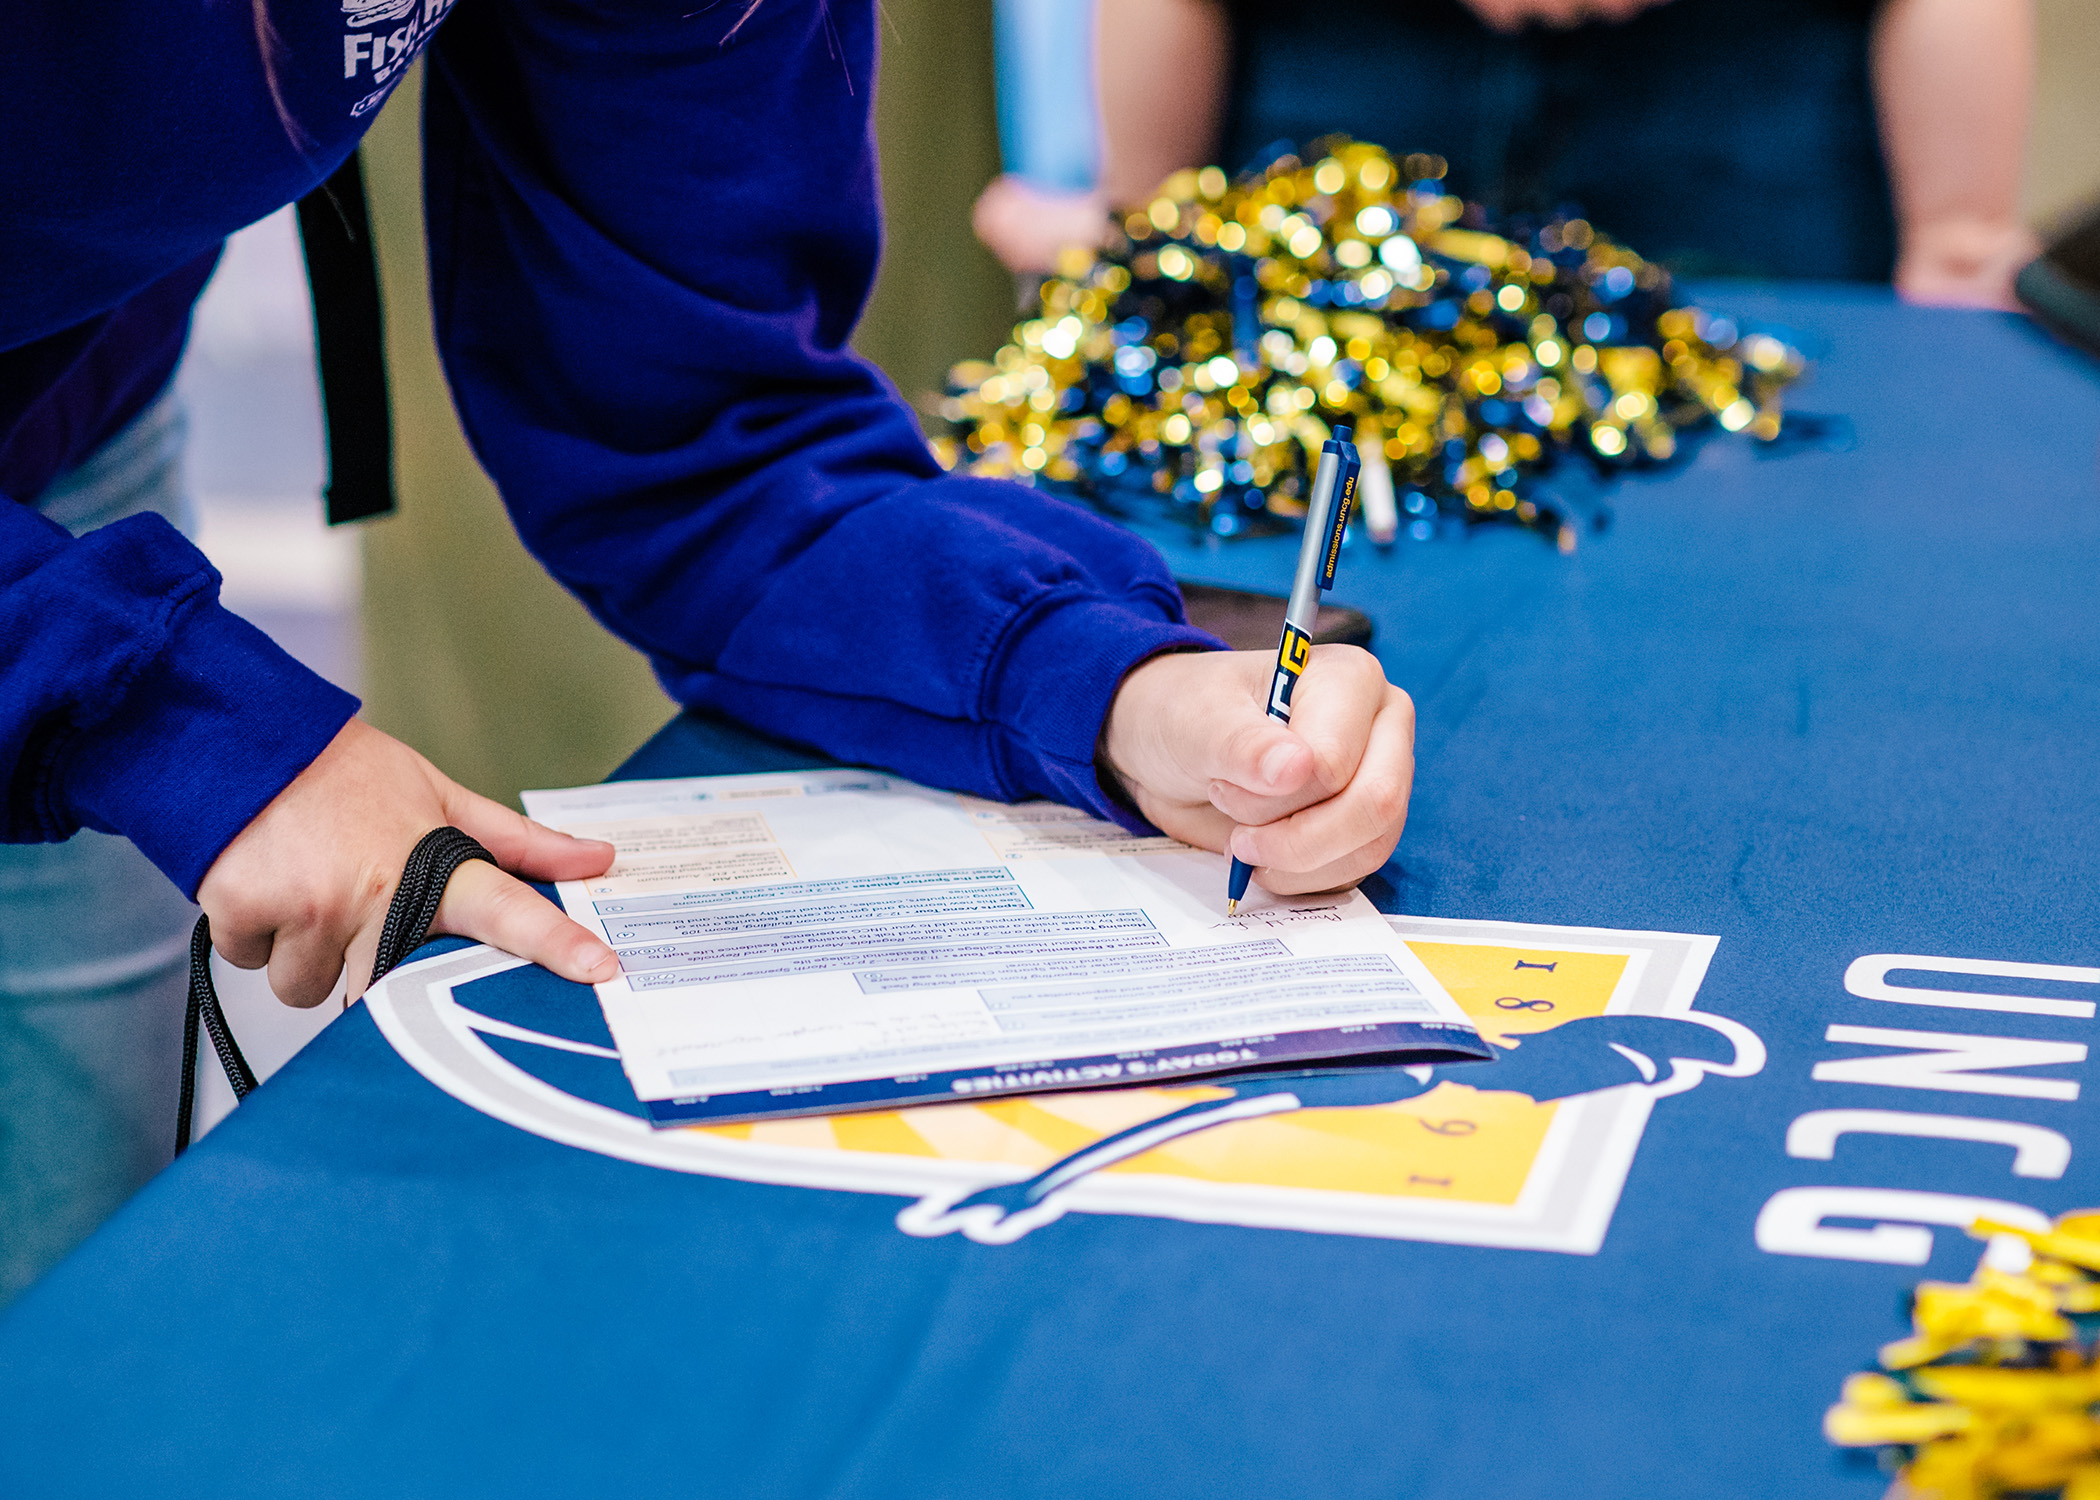 Close-up of person filling out an application with a UNCG pen, on a table with a UNCG tablecloth & pompoms. 